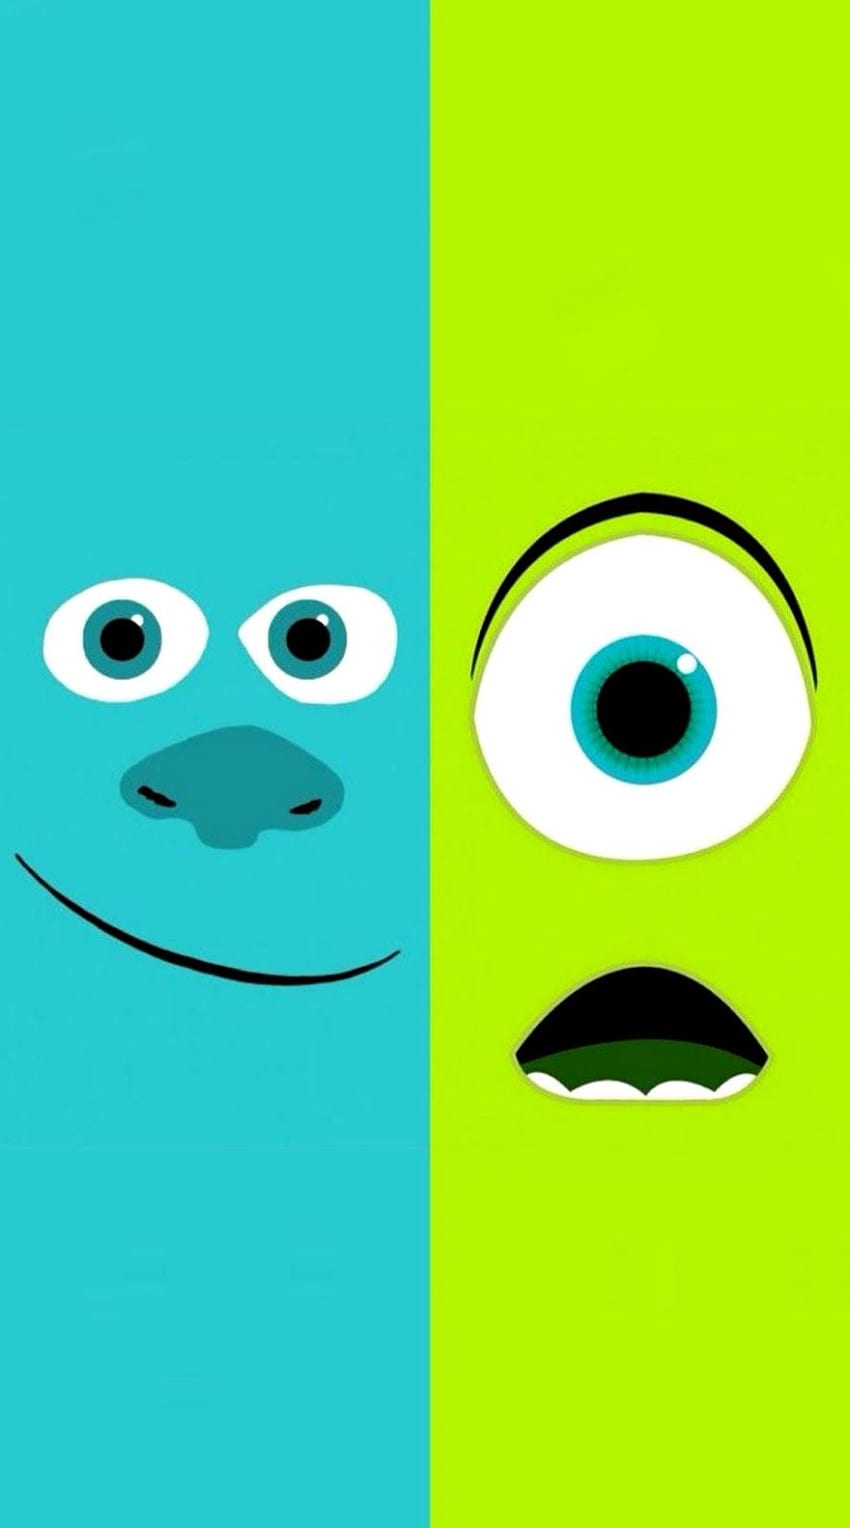 Cute Monsters Inc Wallpapers on WallpaperDog